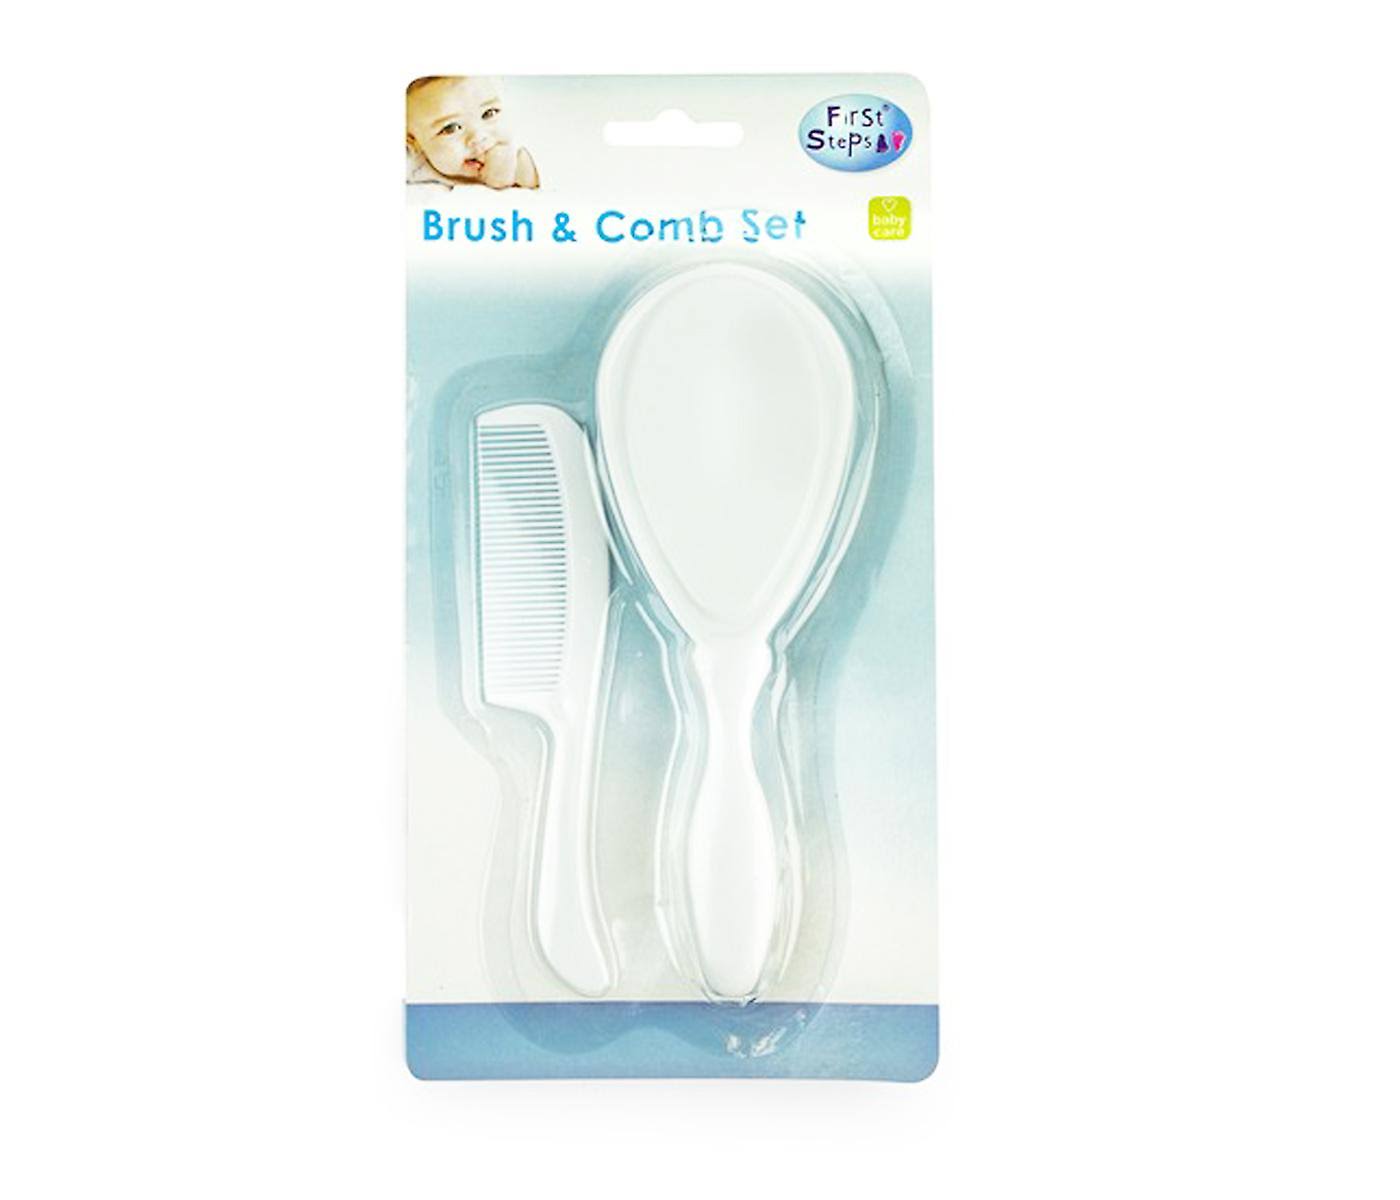 First Steps Baby Brush & Comb Set White